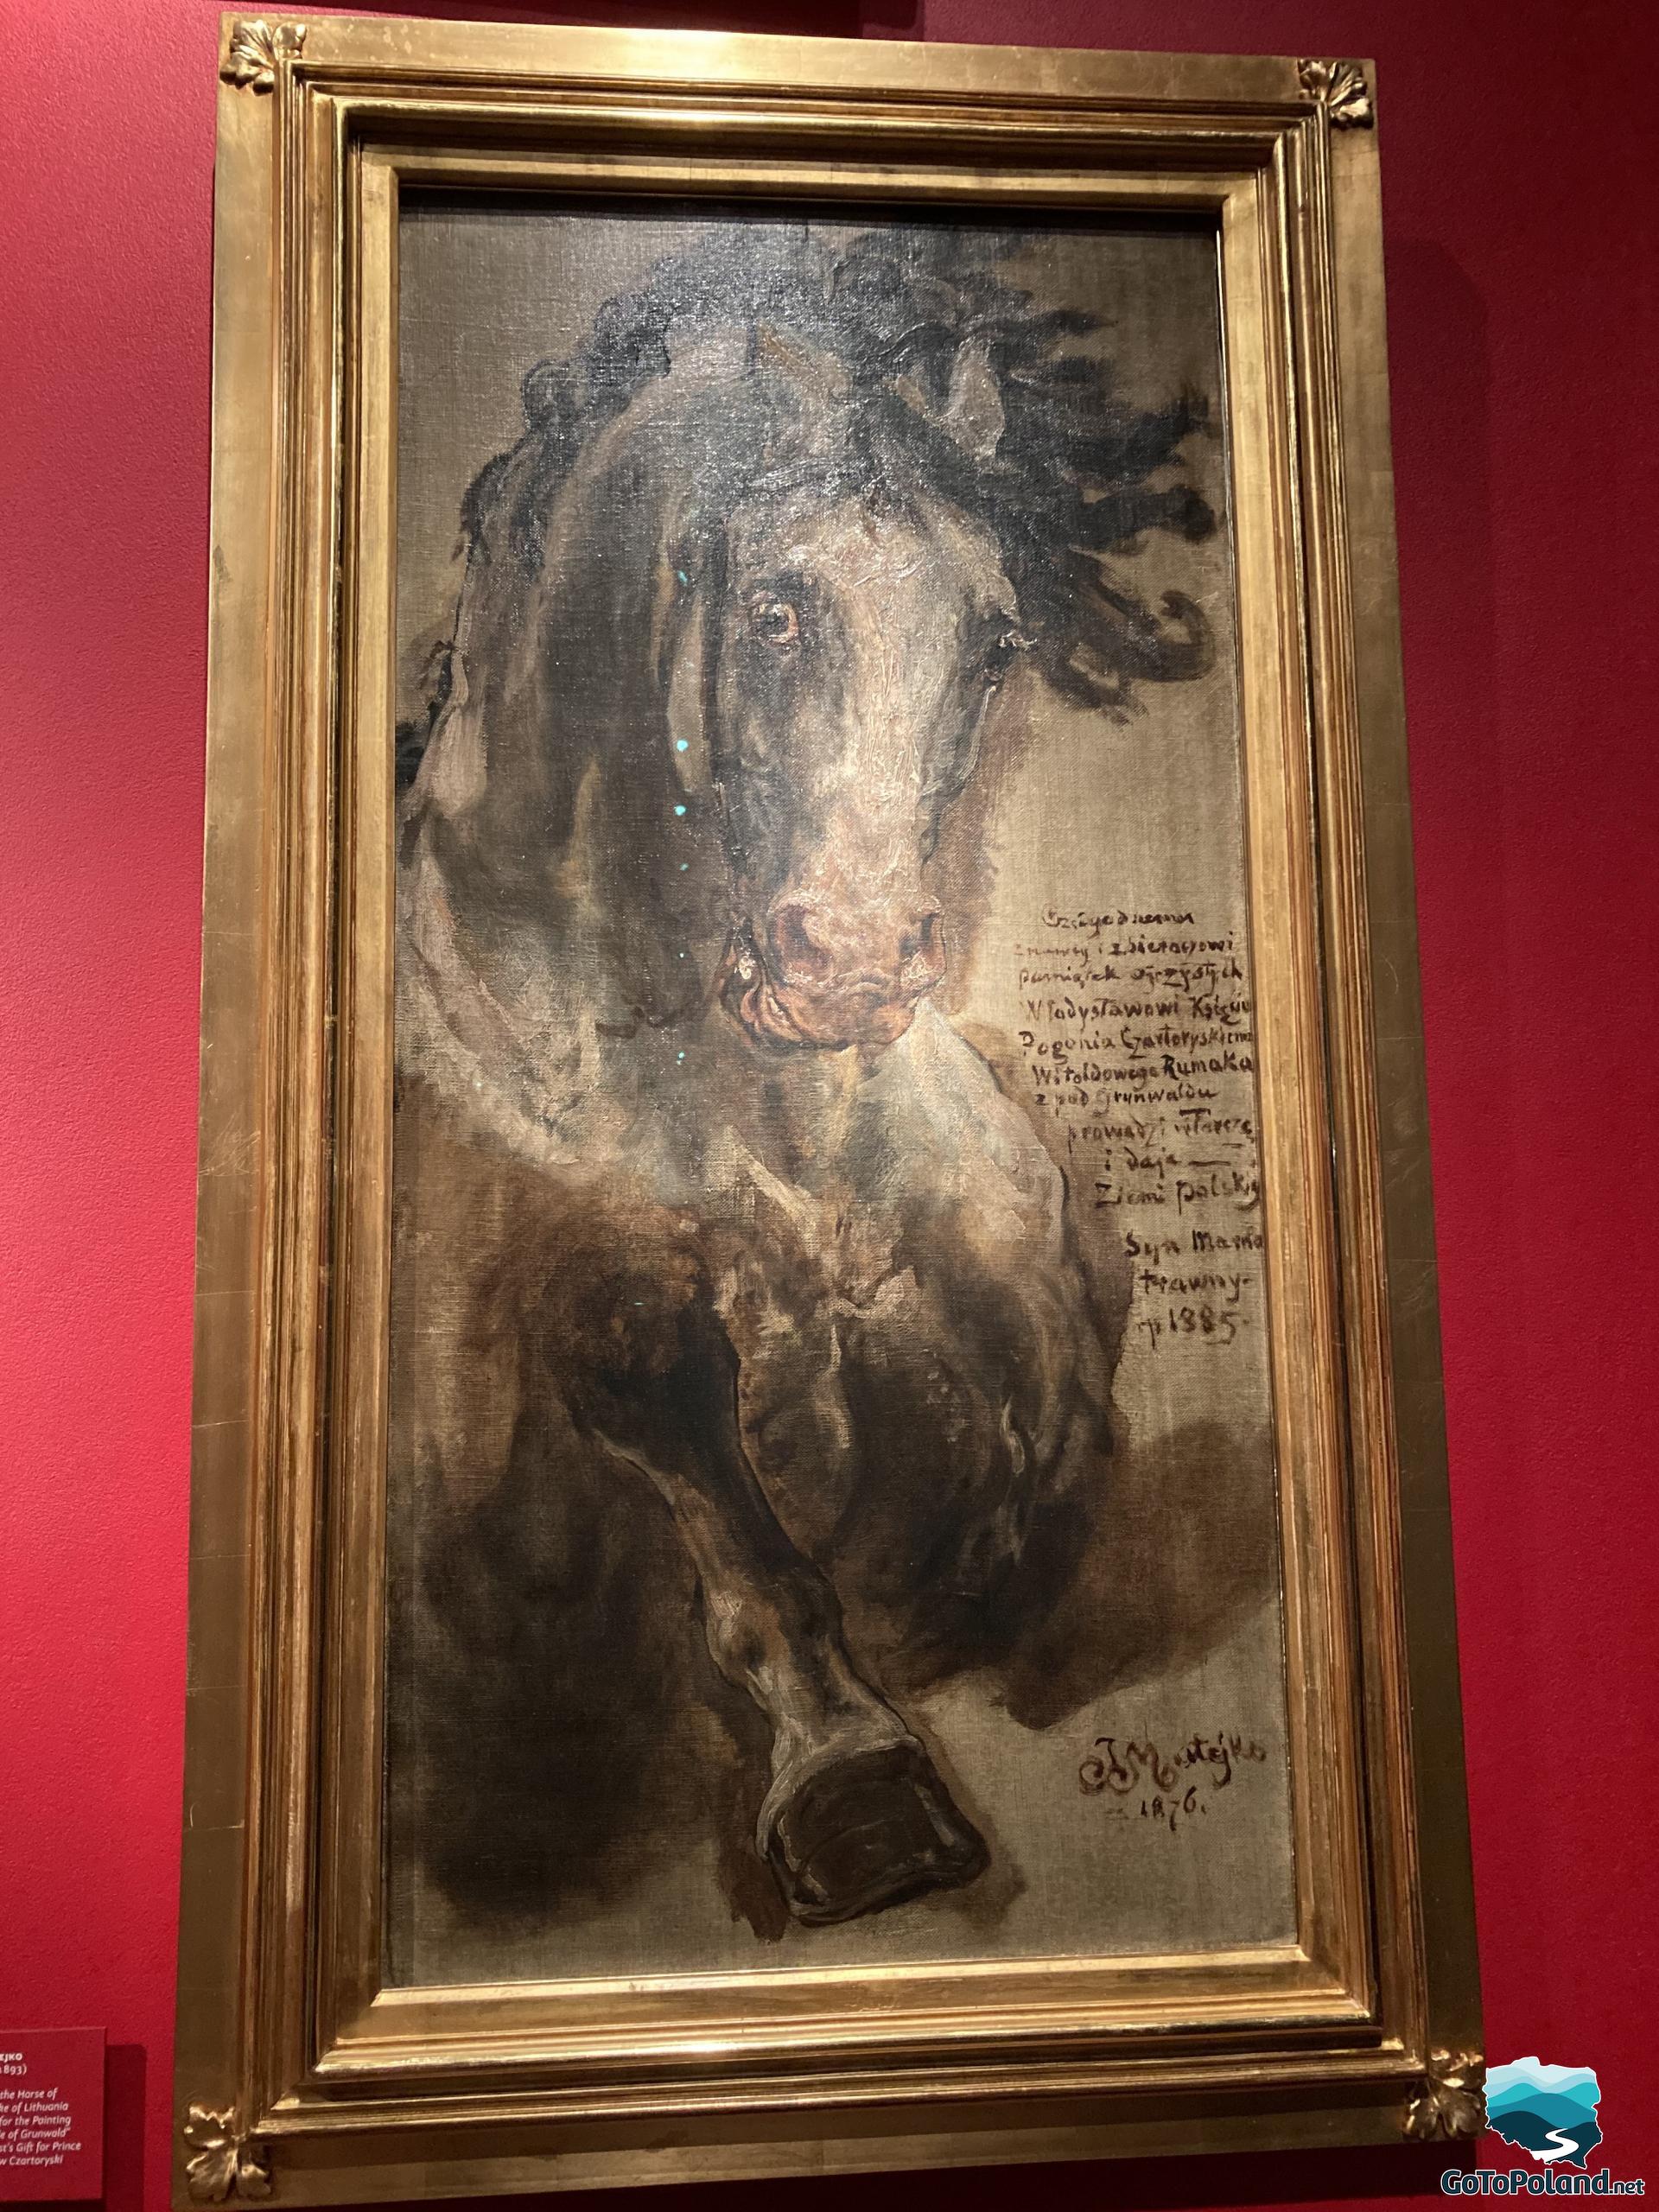 A painting of a horse in a golden frame by Jan Matejko